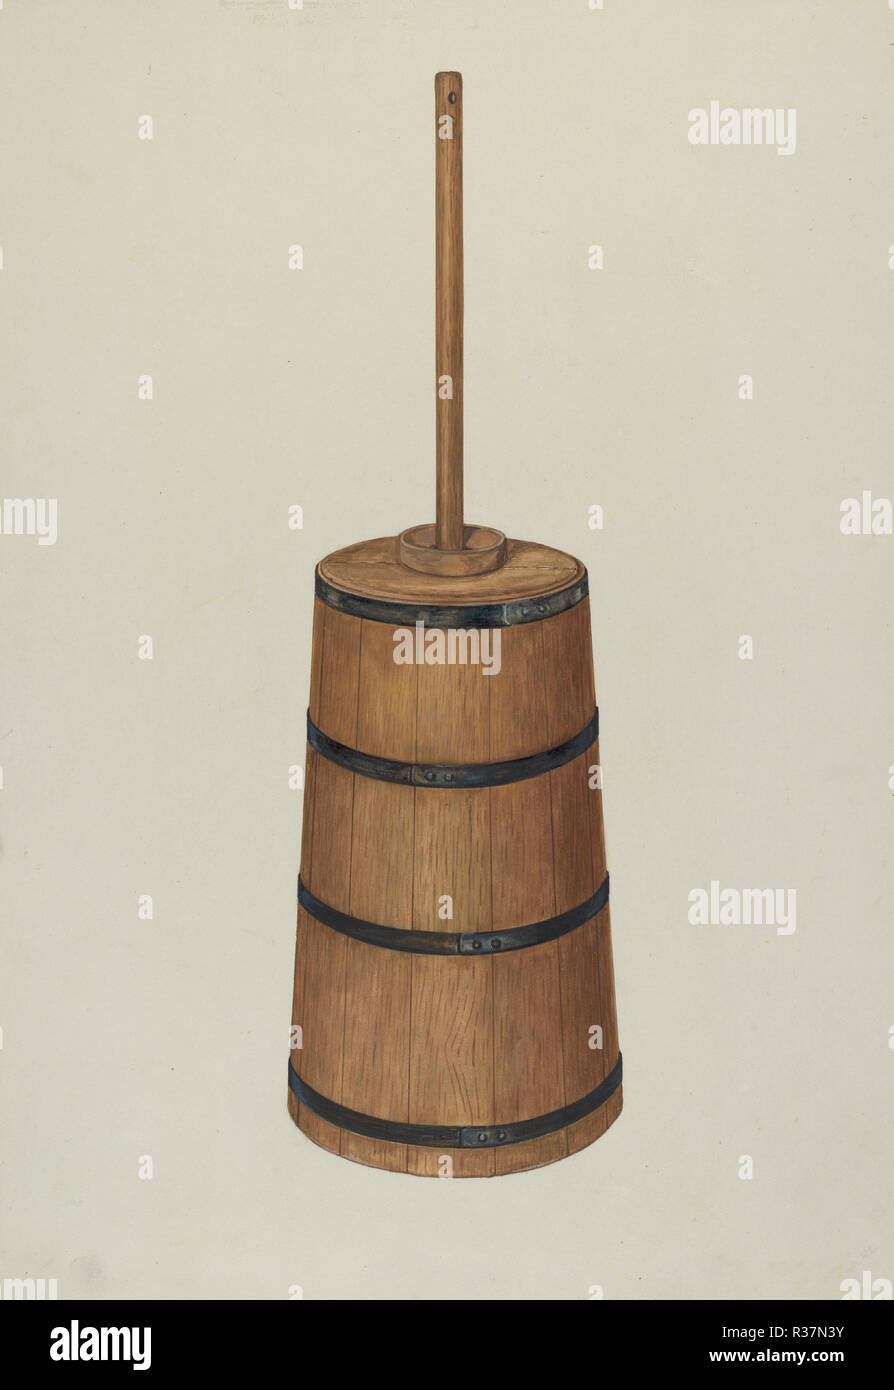 Handmade Churn. Dated: c. 1937. Dimensions: overall: 44.9 x 31 cm (17 11/16 x 12 3/16 in.)  Original IAD Object: top: 10' in diameter; bottom: 14' in diameter; 22' high; dash: 39 3/4' long. Medium: watercolor, graphite, and pen and ink on paperboard. Museum: National Gallery of Art, Washington DC. Author: Rex F. Bush. Stock Photo